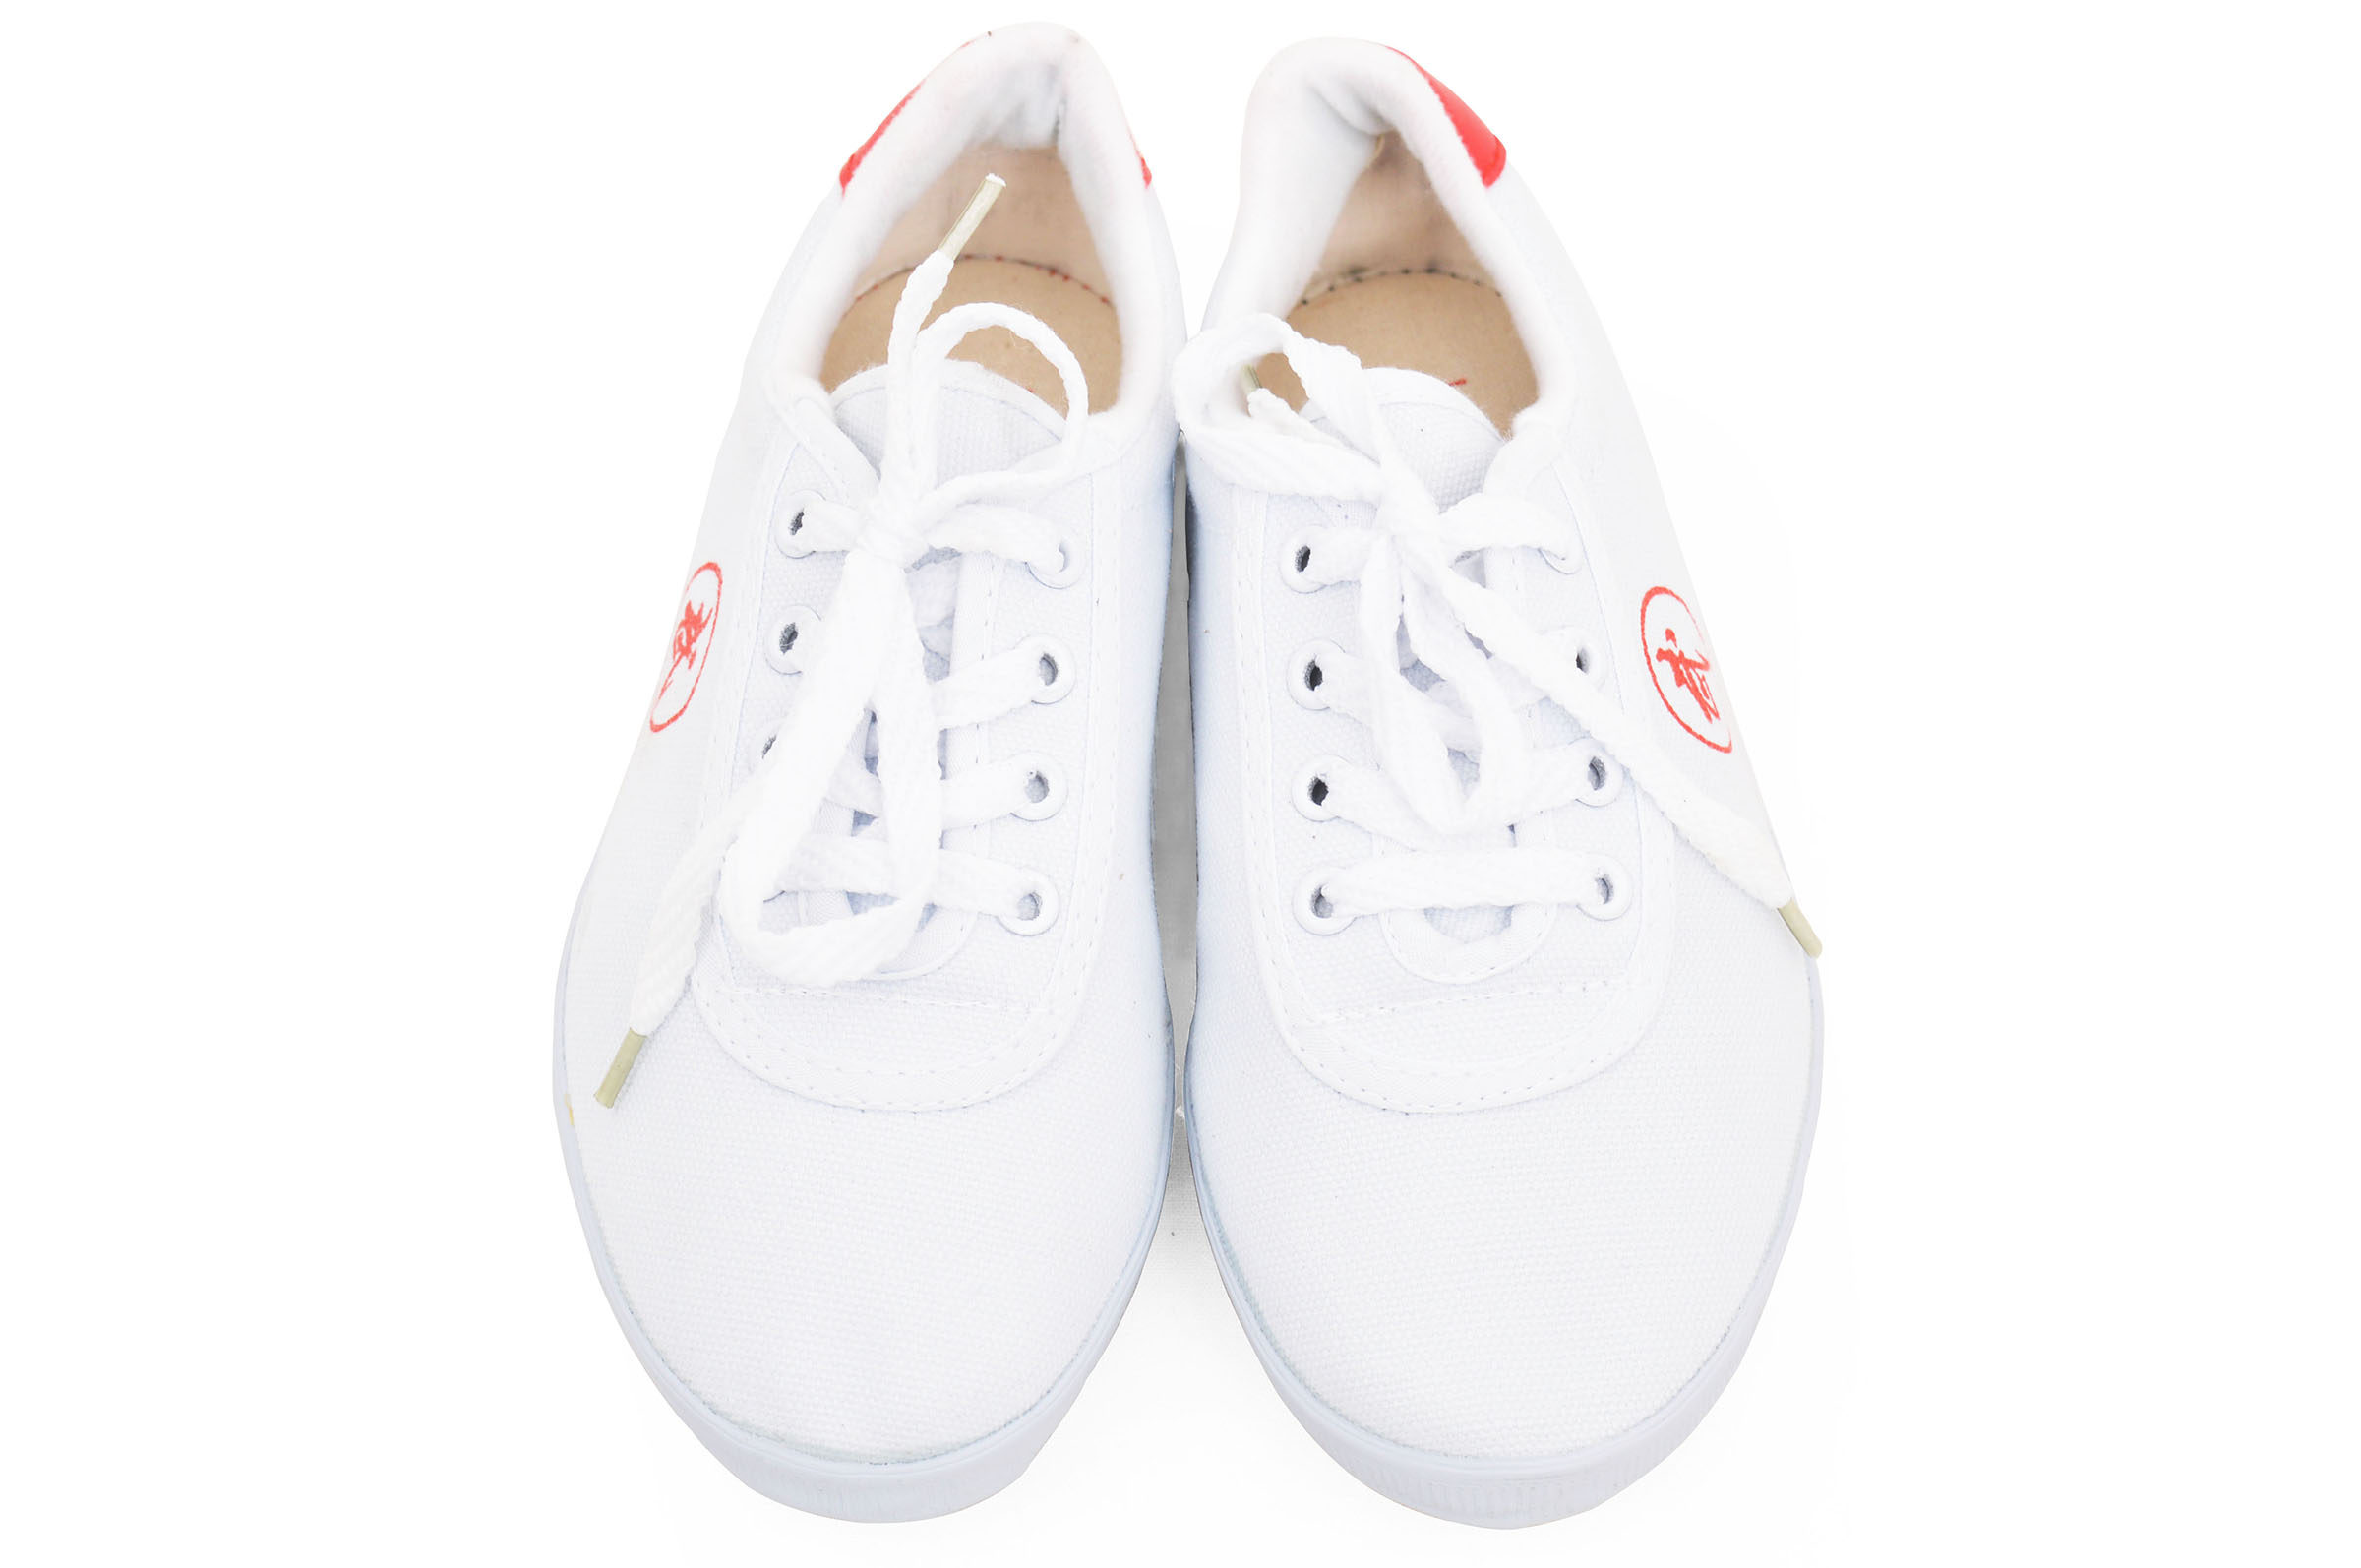 Wushu shoes for kid, Double Star